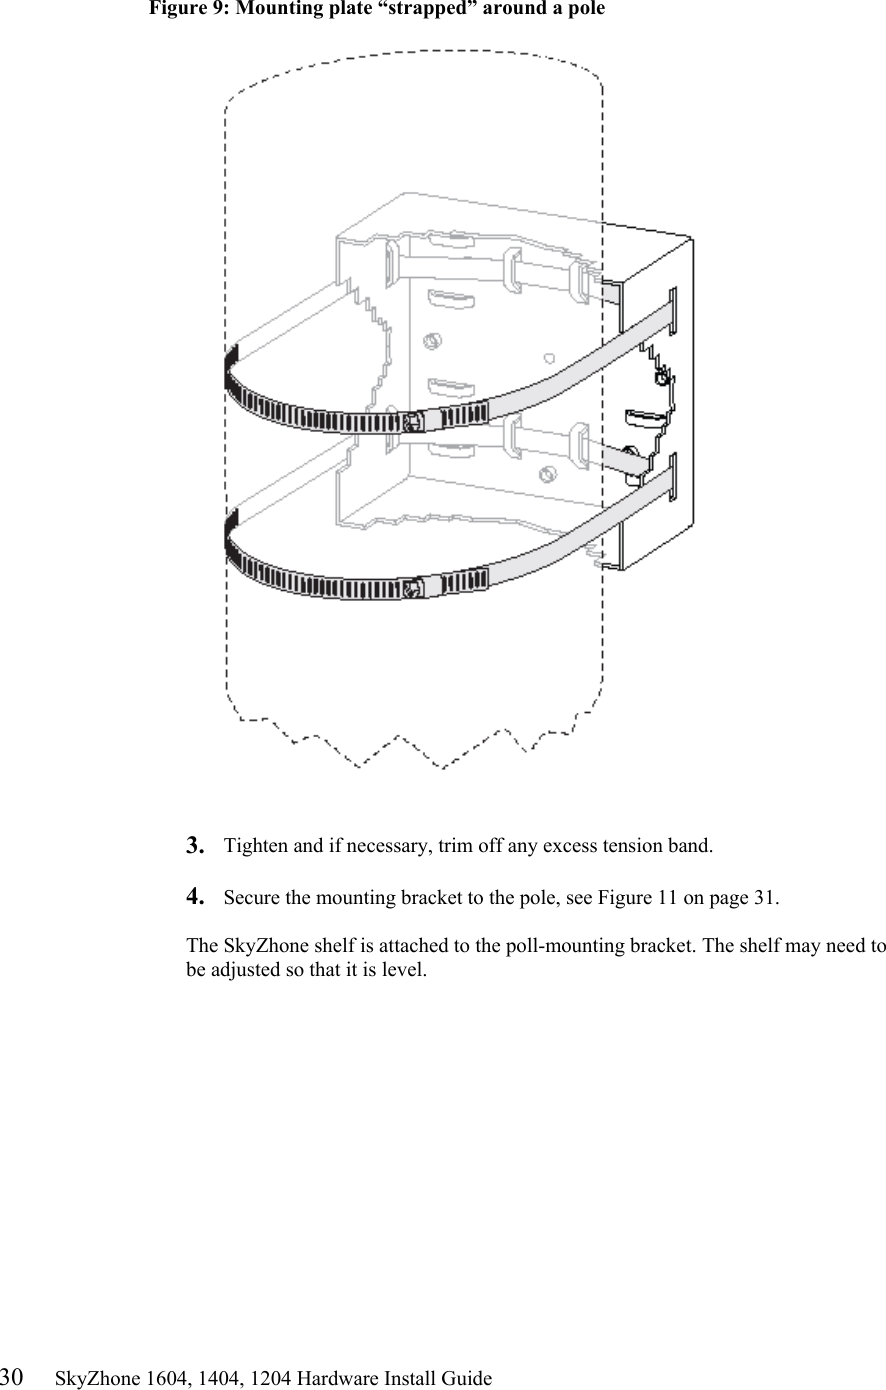 30     SkyZhone 1604, 1404, 1204 Hardware Install Guide  Figure 9: Mounting plate “strapped” around a pole     3.  Tighten and if necessary, trim off any excess tension band.  4.  Secure the mounting bracket to the pole, see Figure 11 on page 31.  The SkyZhone shelf is attached to the poll-mounting bracket. The shelf may need to be adjusted so that it is level.  